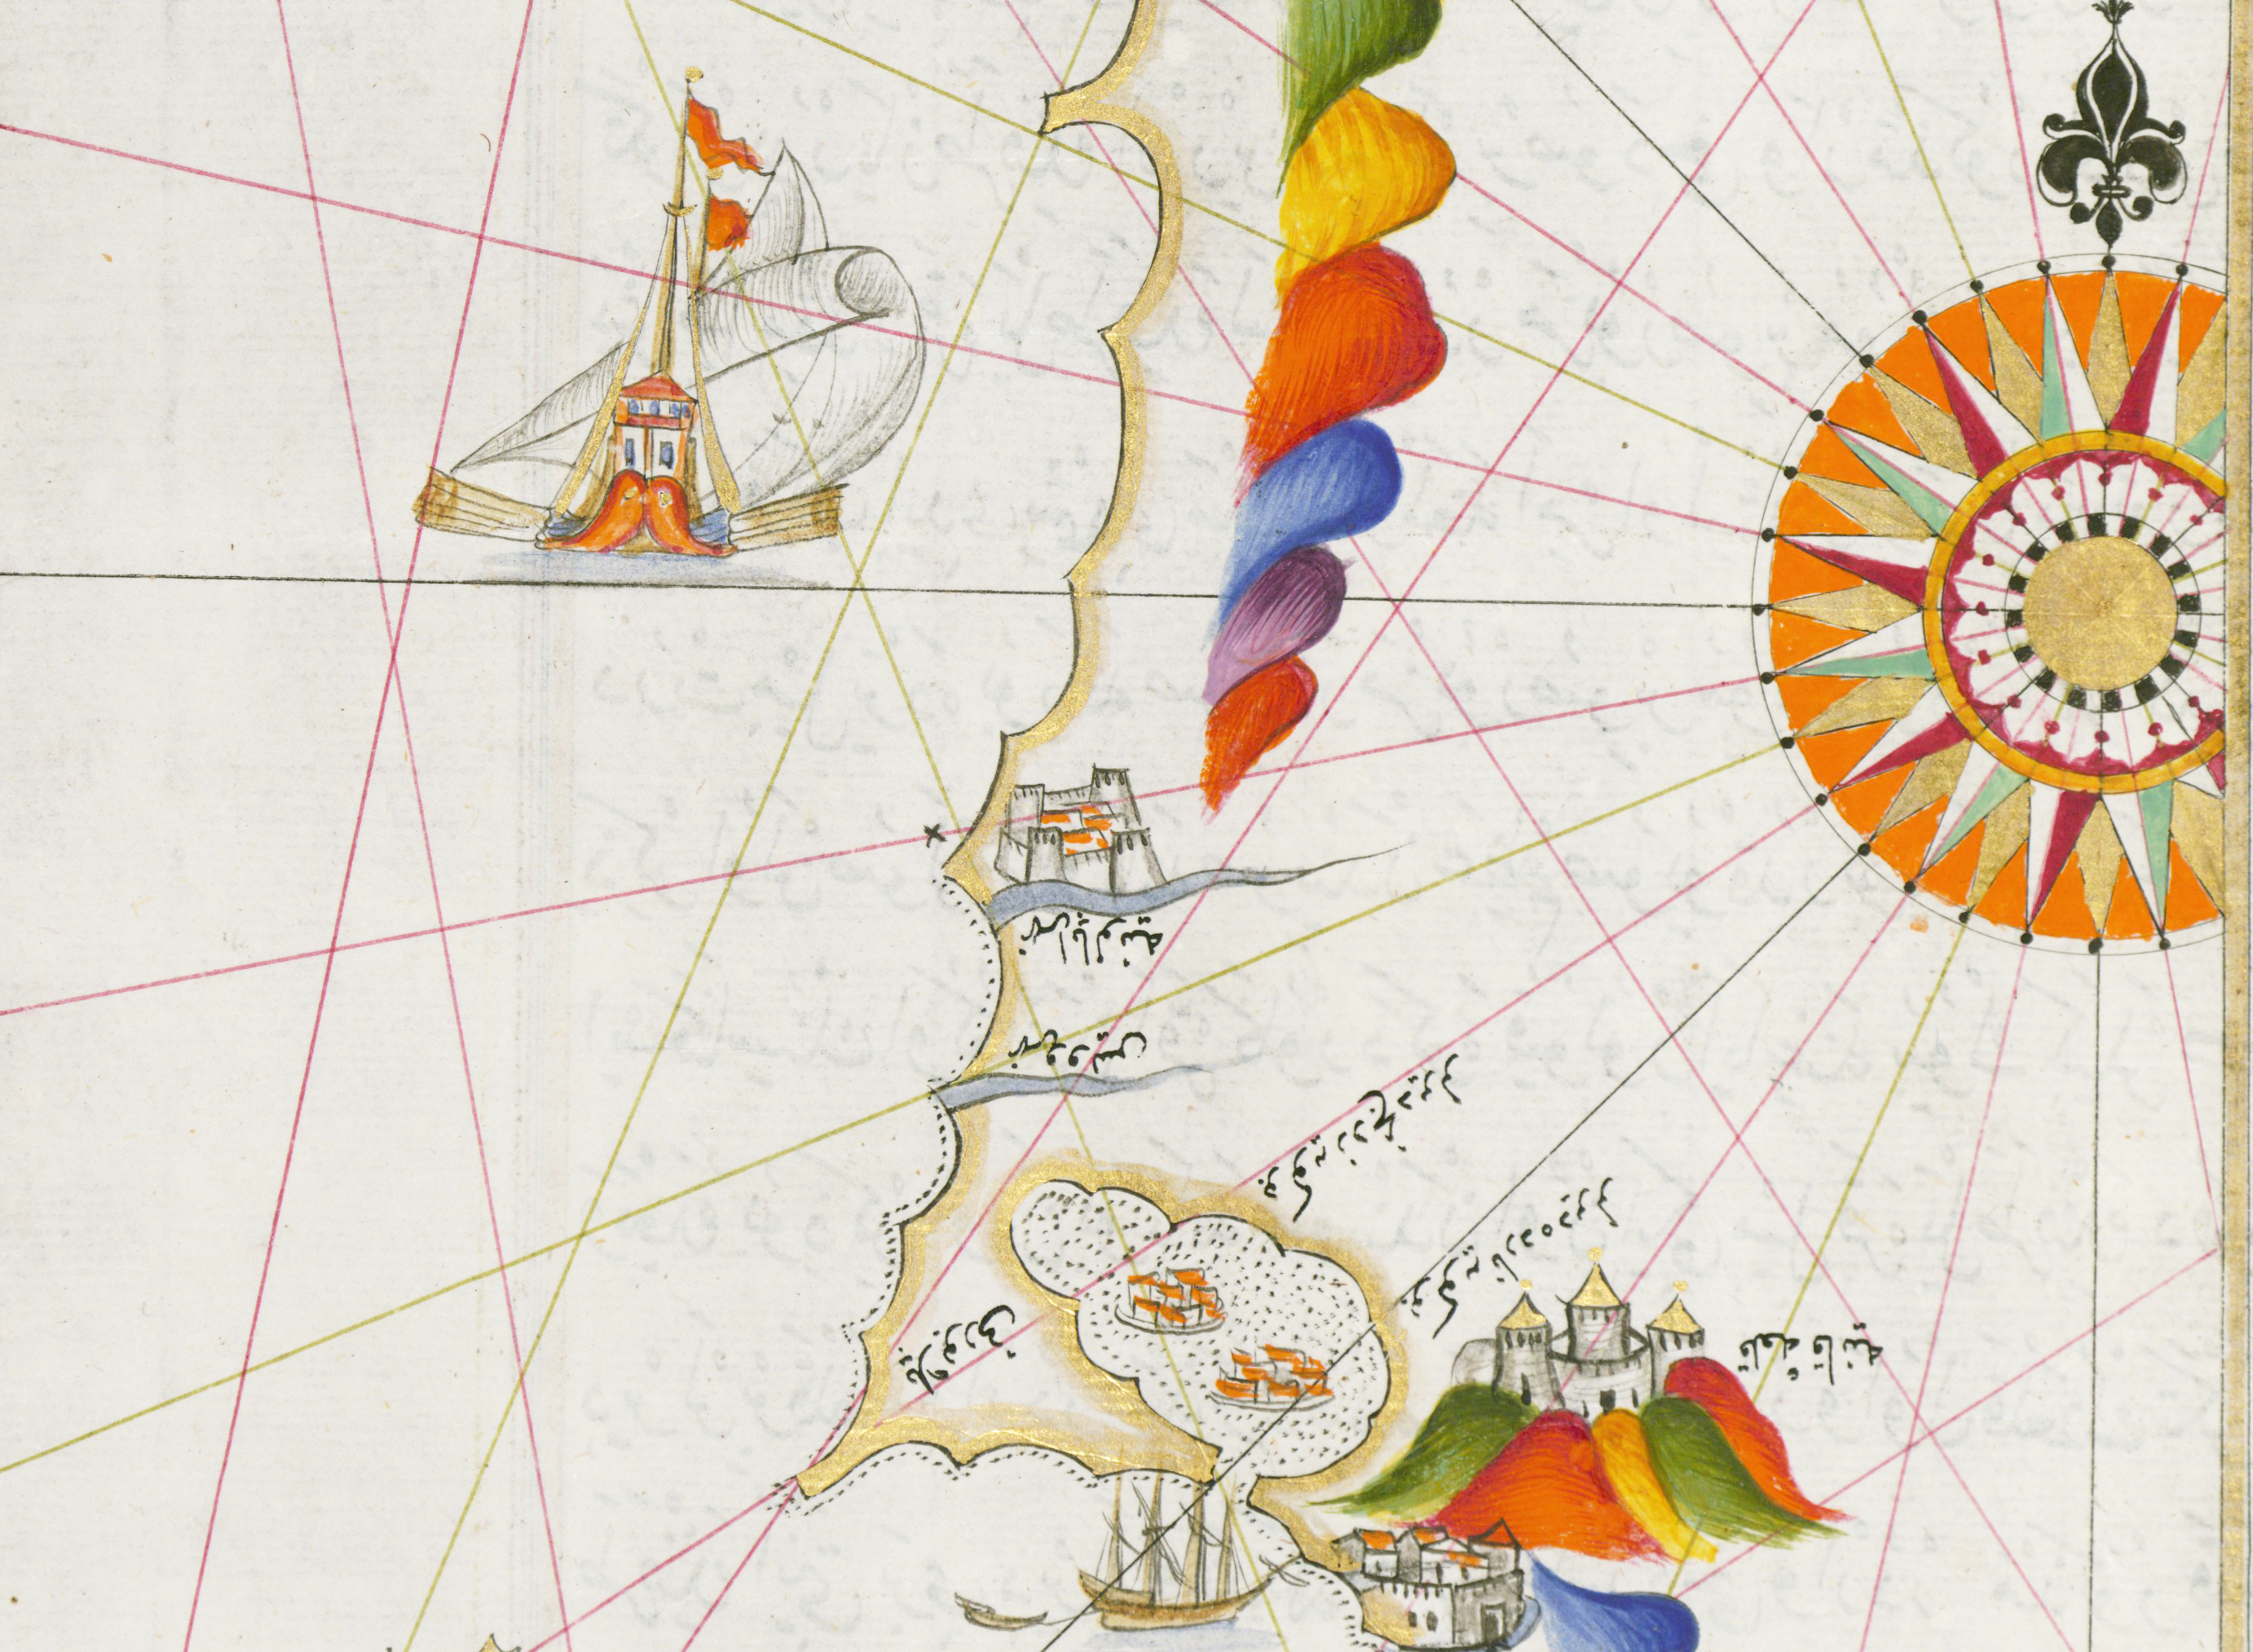 Panel: Maps to the past. Open digital approaches to the investigation of historical maps.